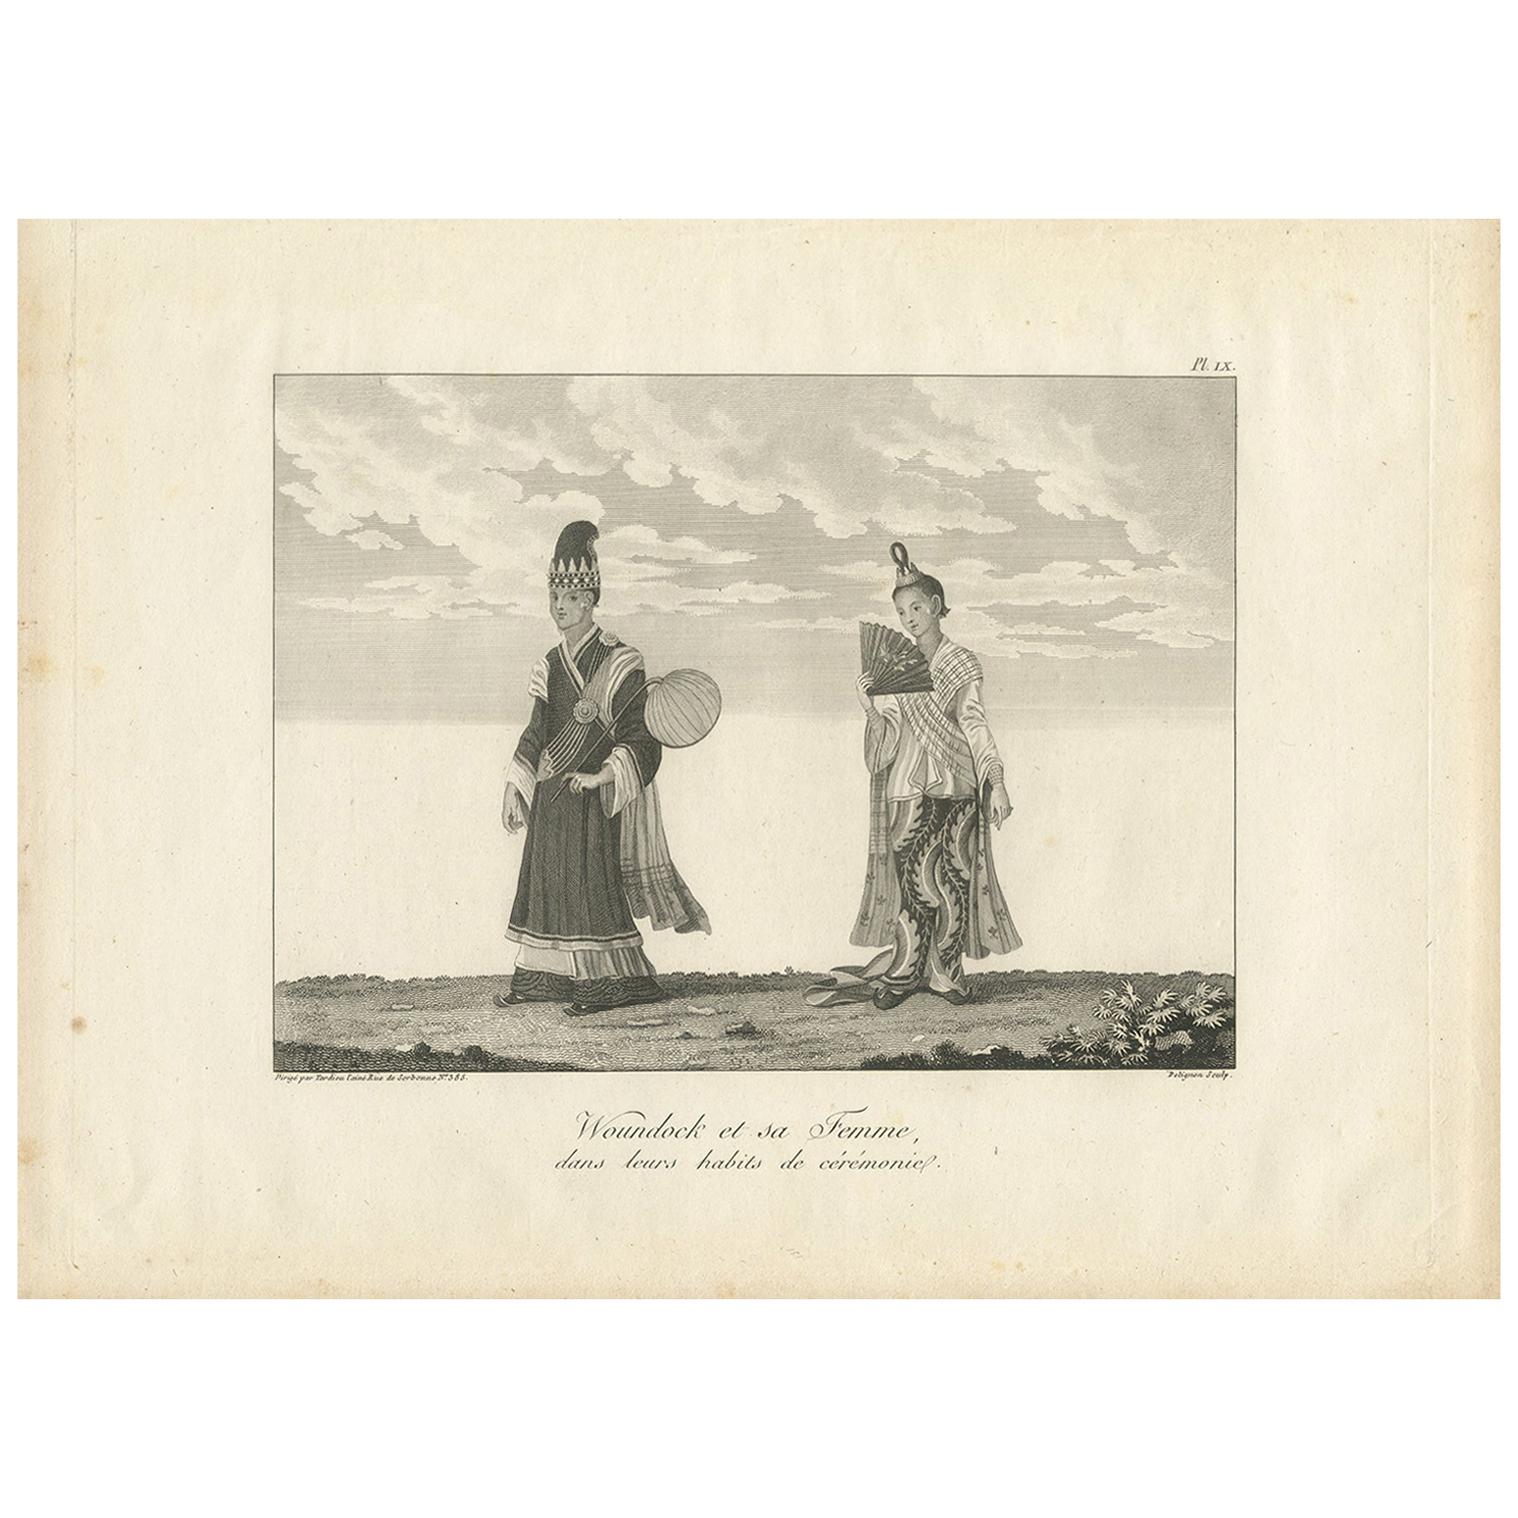 Antique Print of Burmese Costumes by Symes, '1800' For Sale